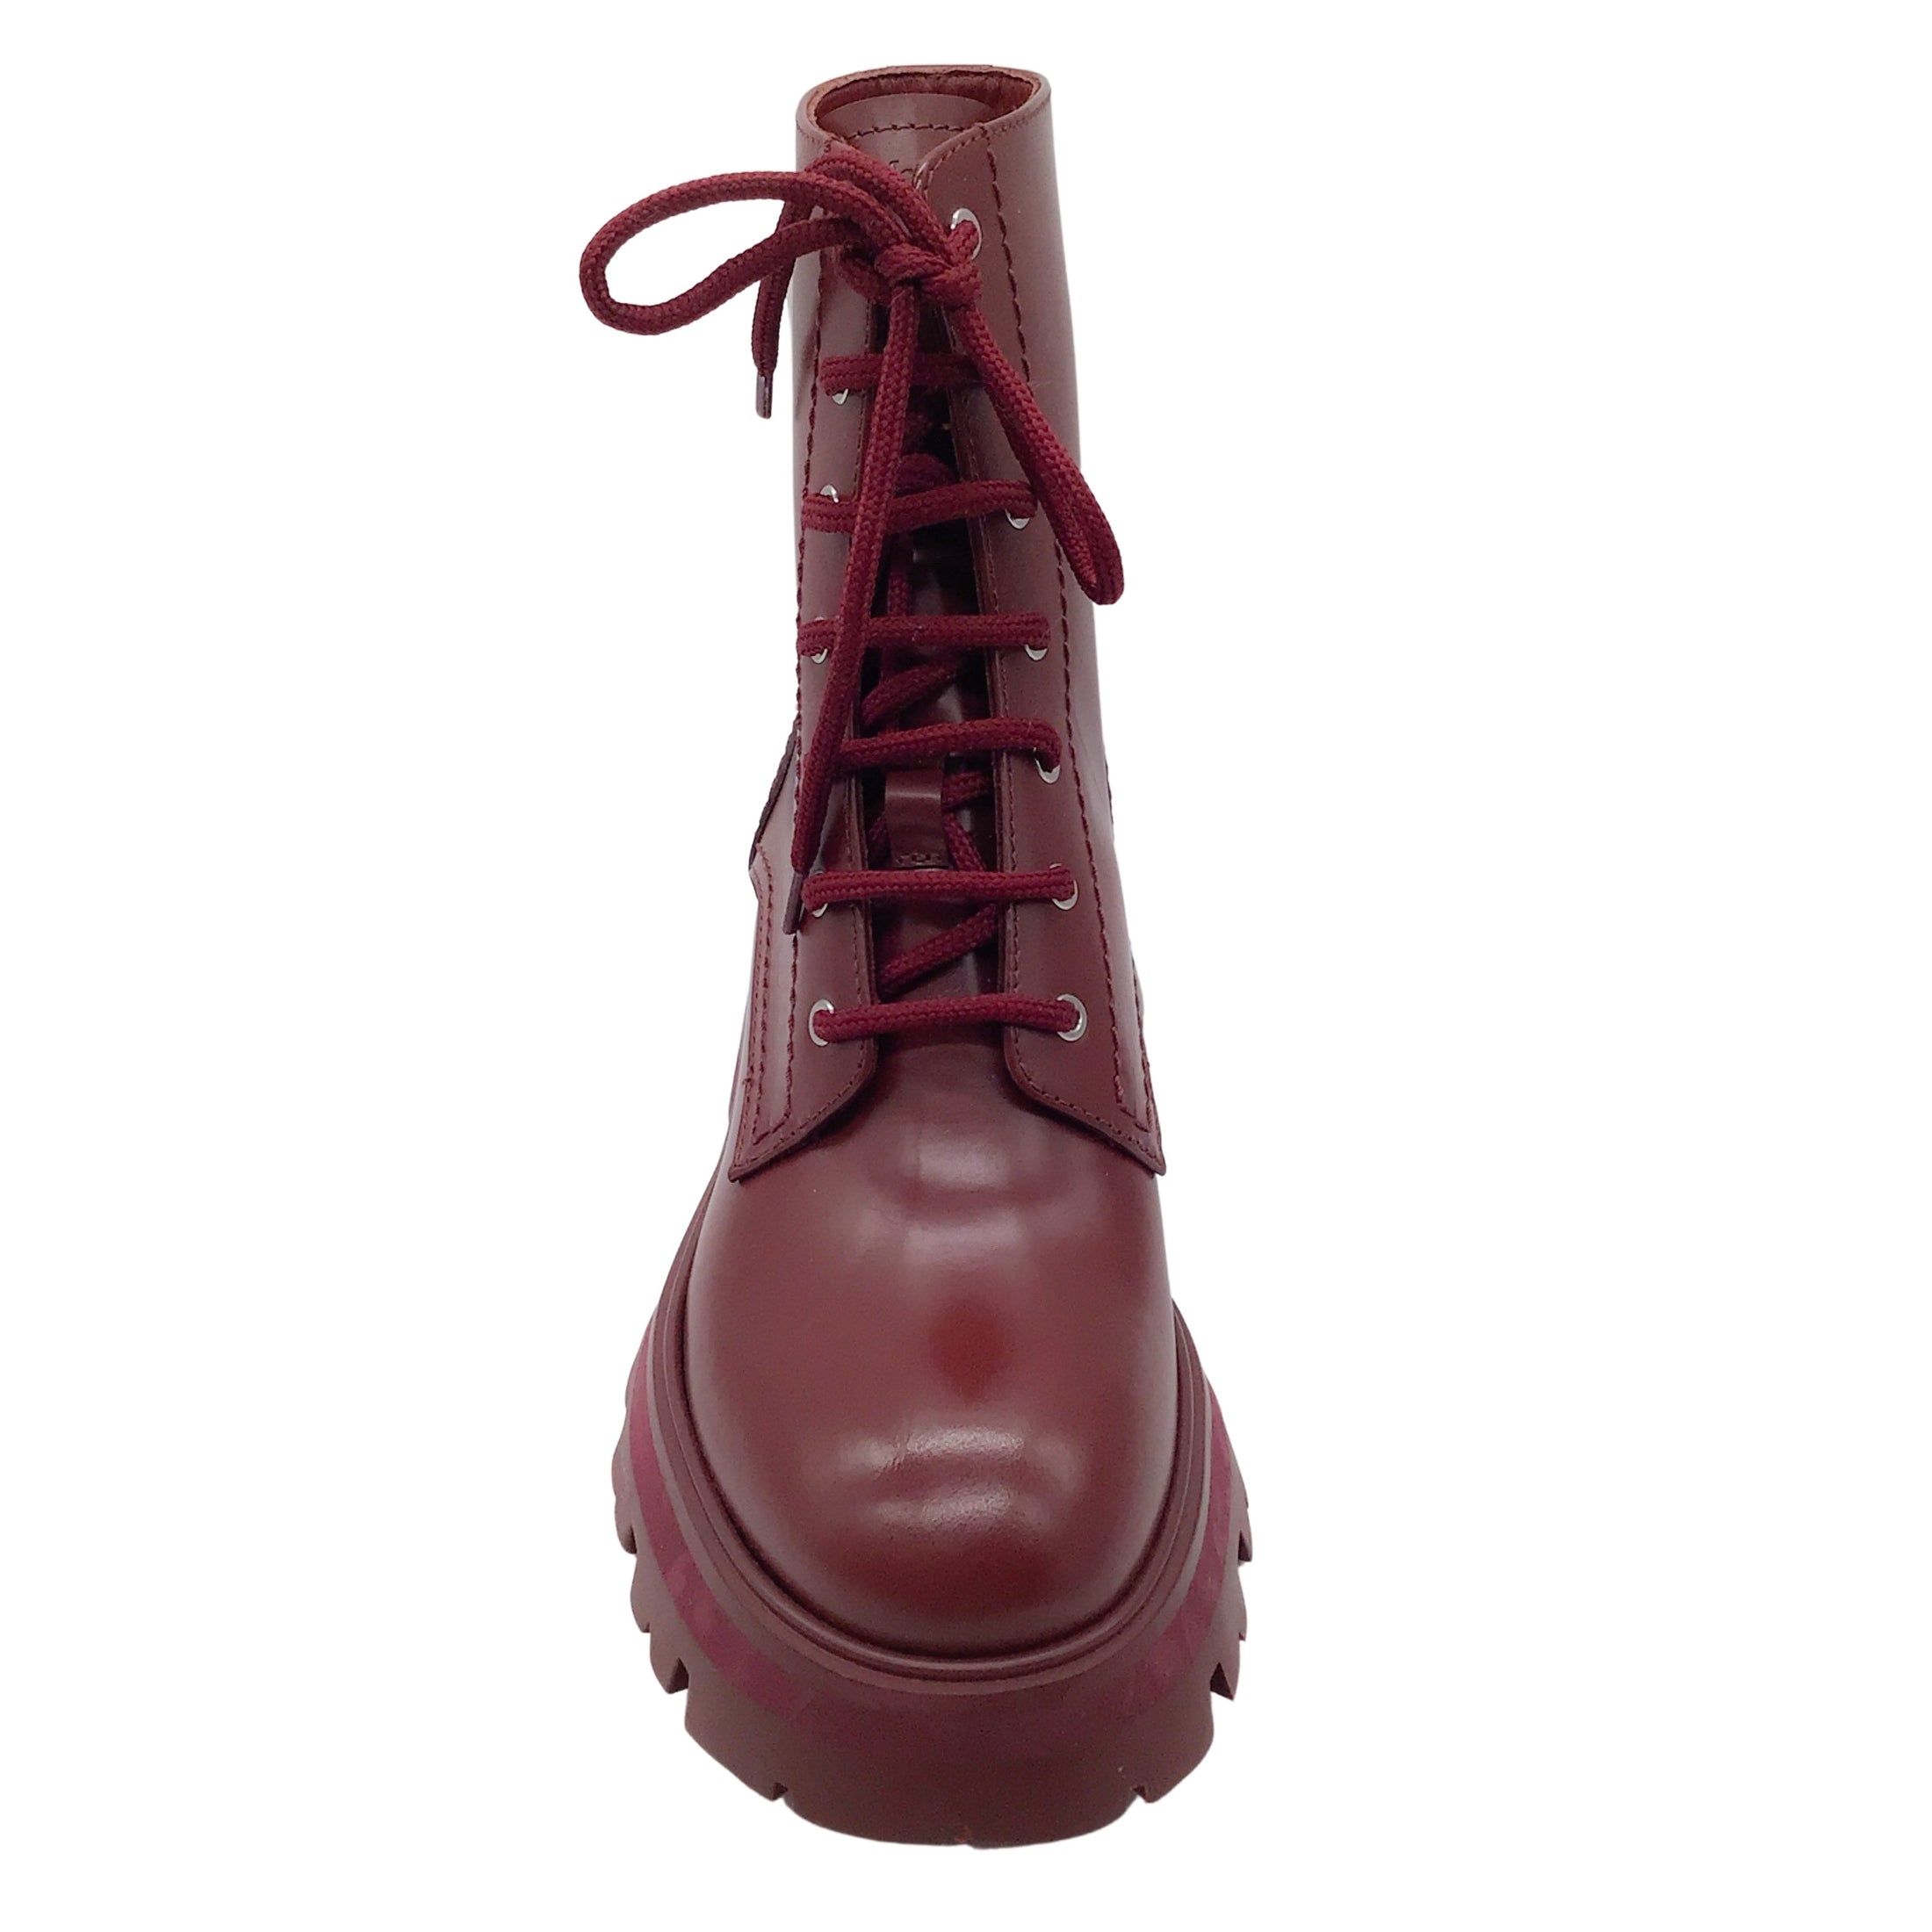 Alexander McQueen Burgundy Lace-Up Leather Boots